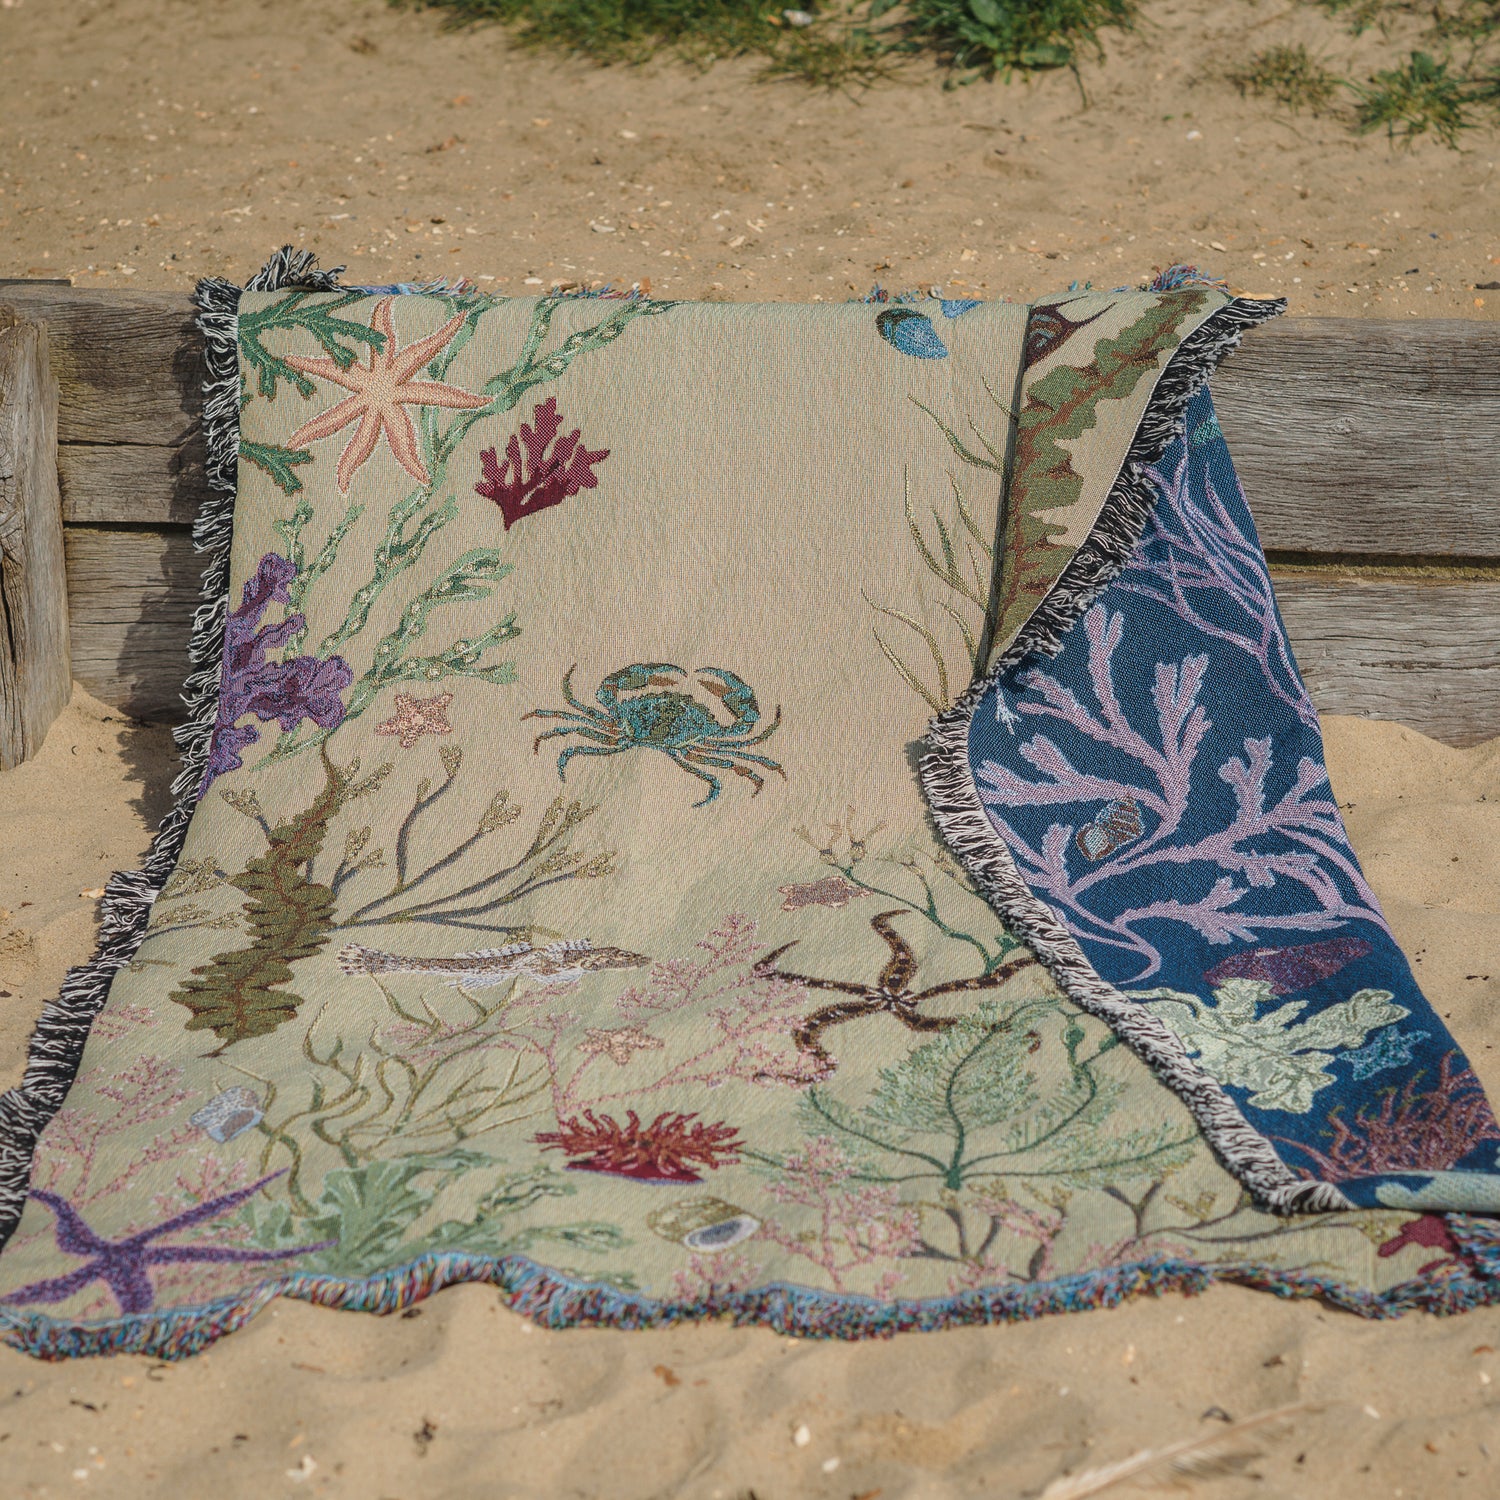 an Arcana Intertidal Sand blanket with sea creatures on it lying on the sand on the beach